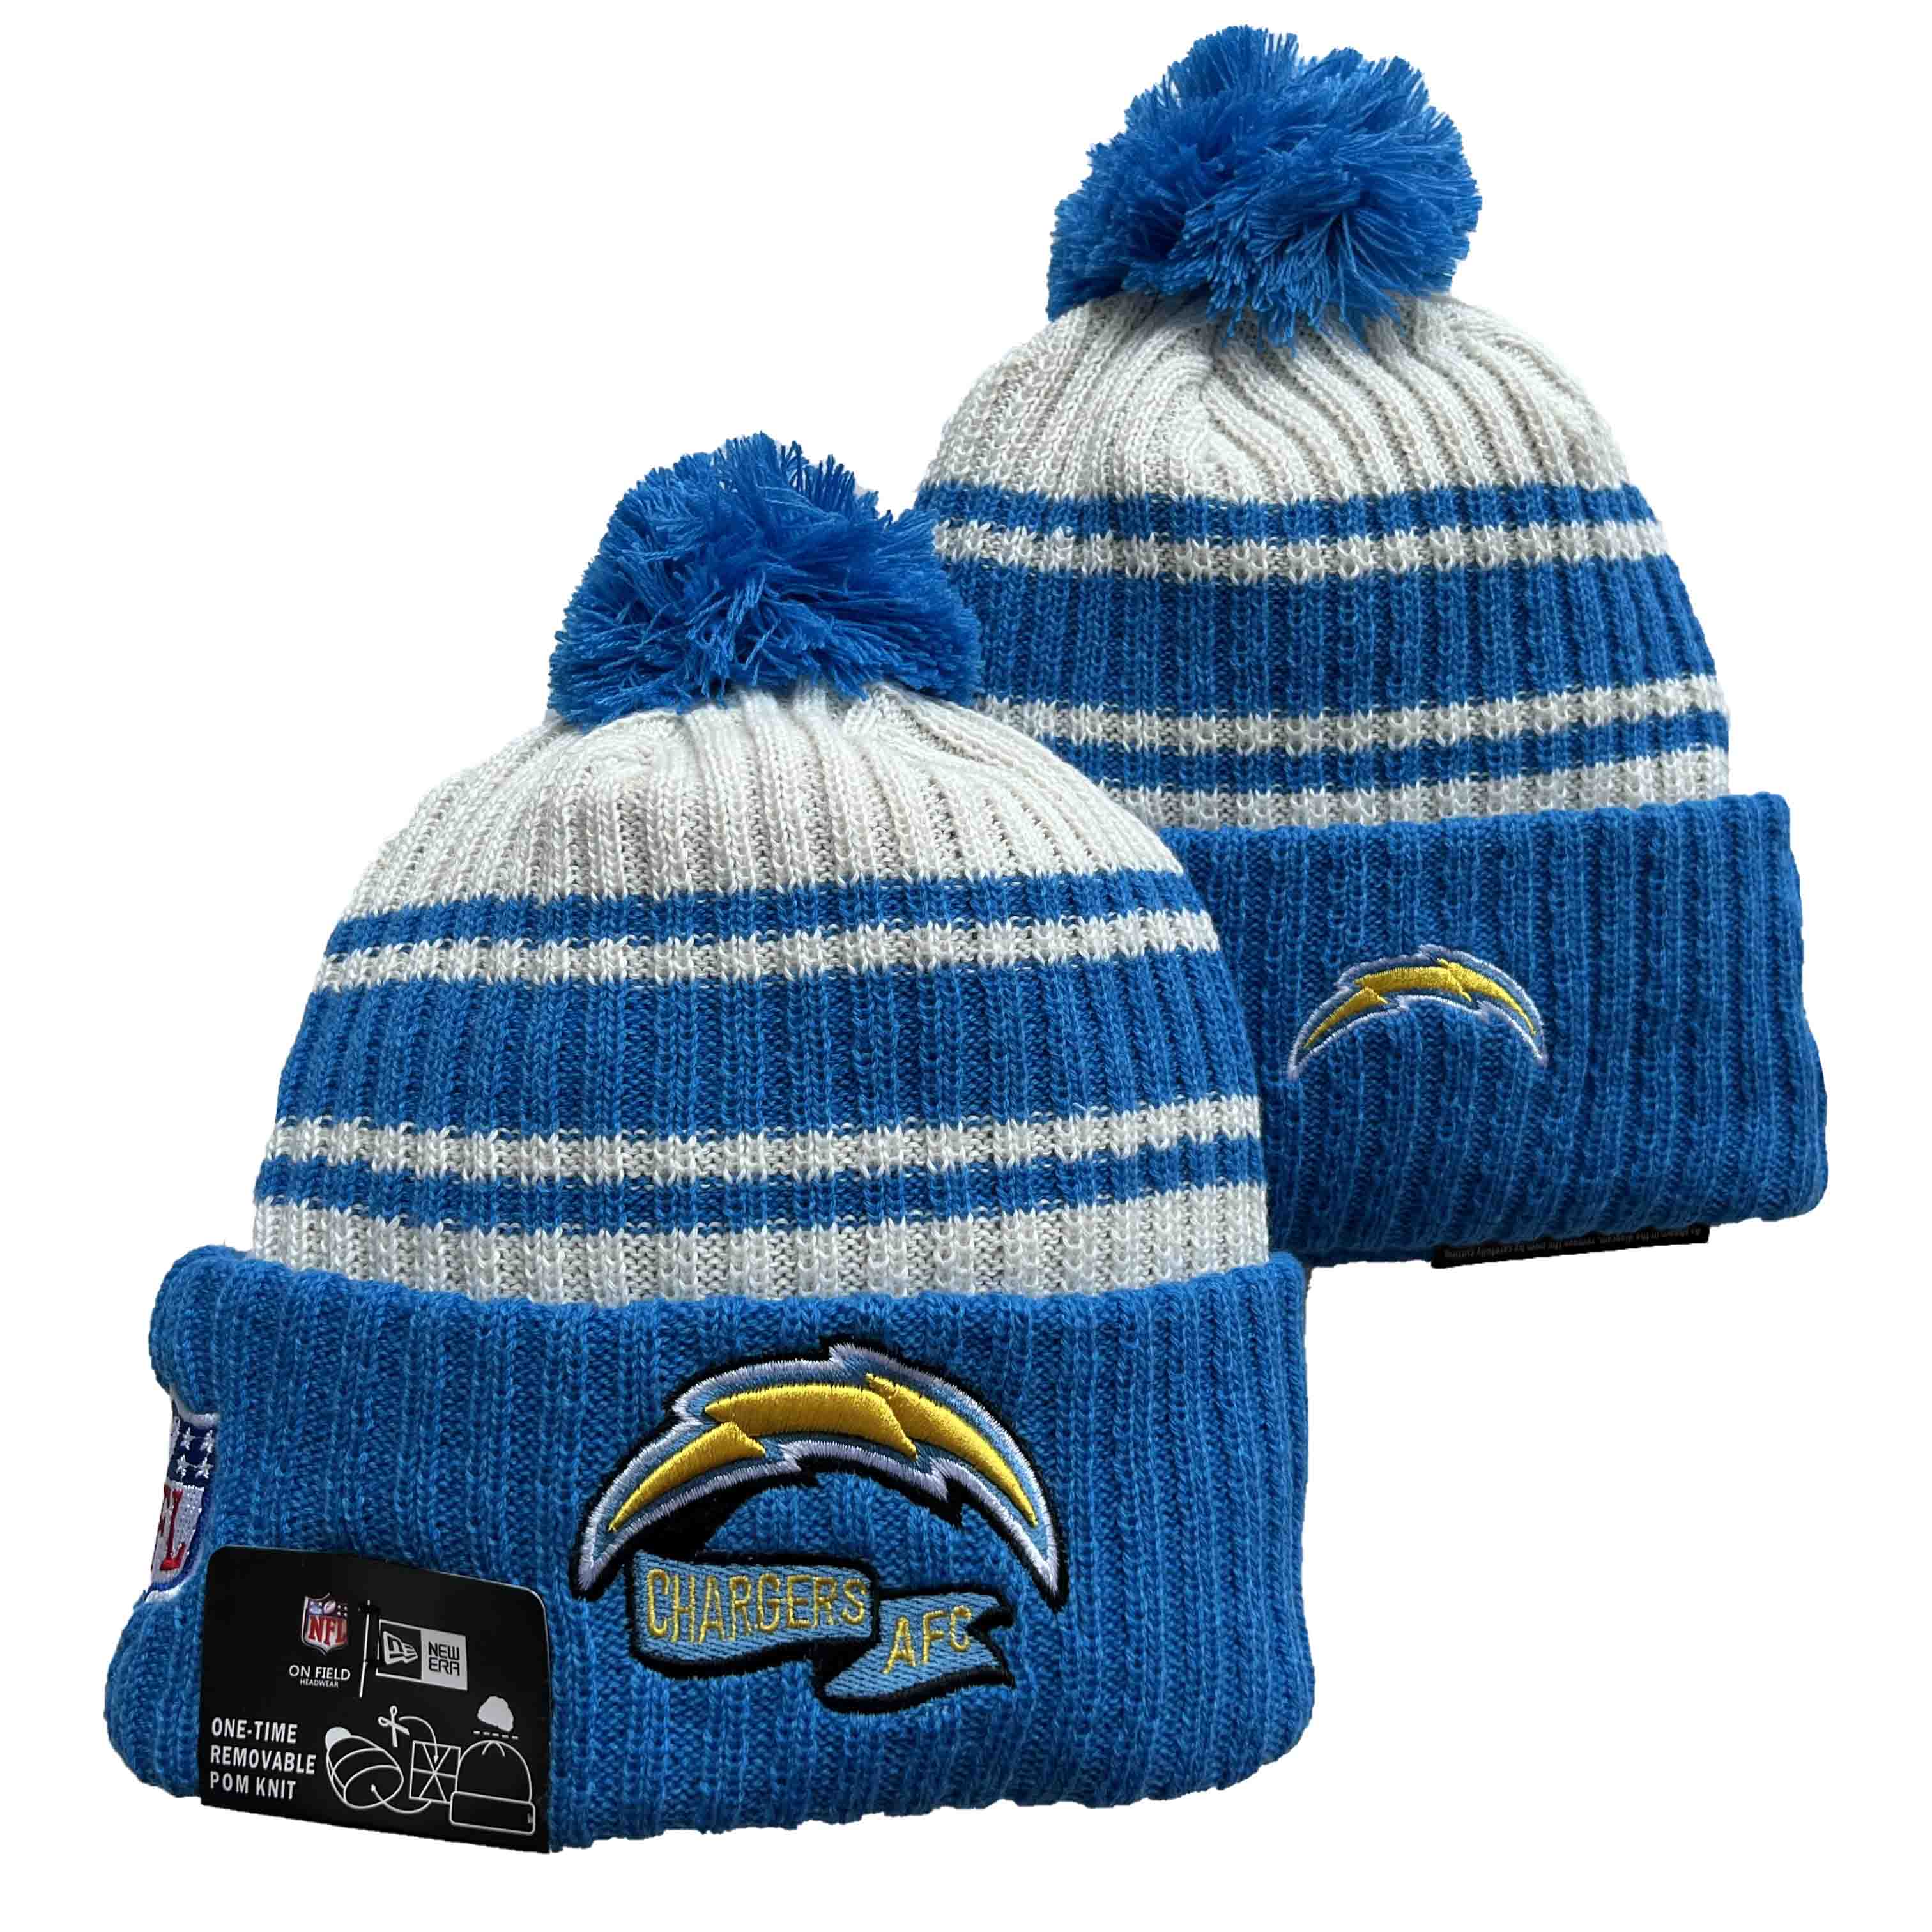 NFL San Diego Chargers Beanies Knit Hats-YD1117